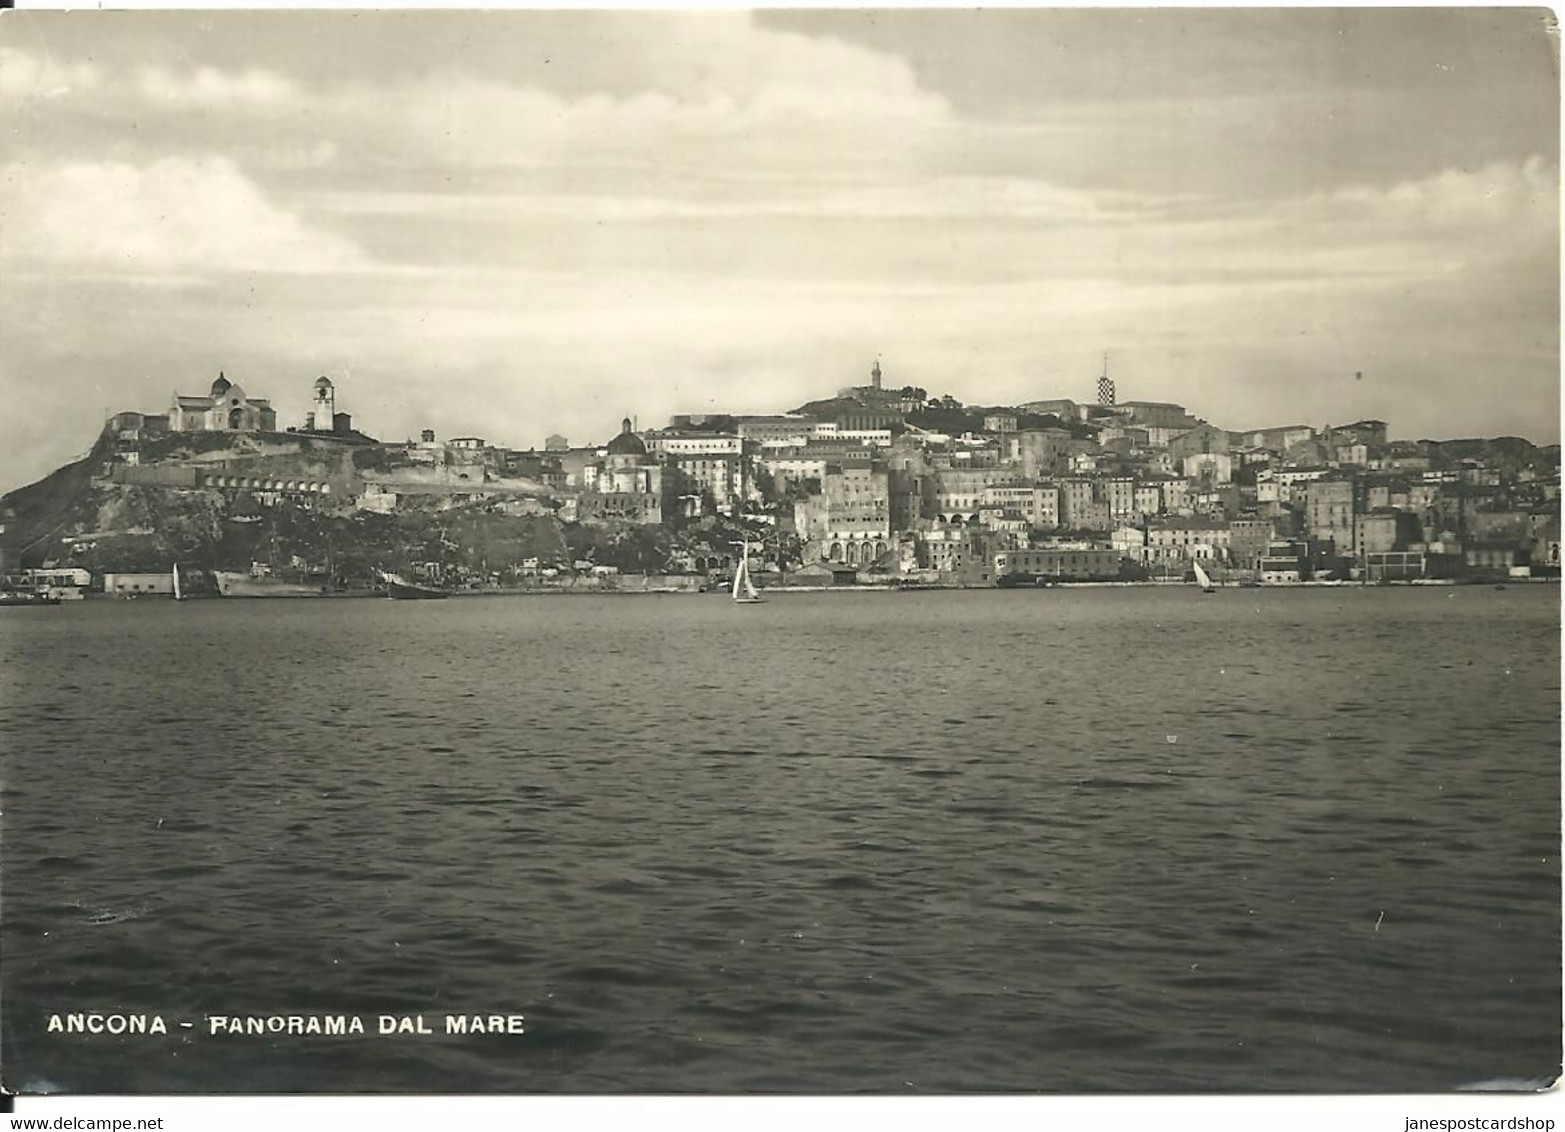 REAL PHOTOGRAPHIC POSTCARD - ANCONA - PANORAMA DAL MARE - LARGER SIZED POSTCARD IN GOOD CONDITION - Ancona